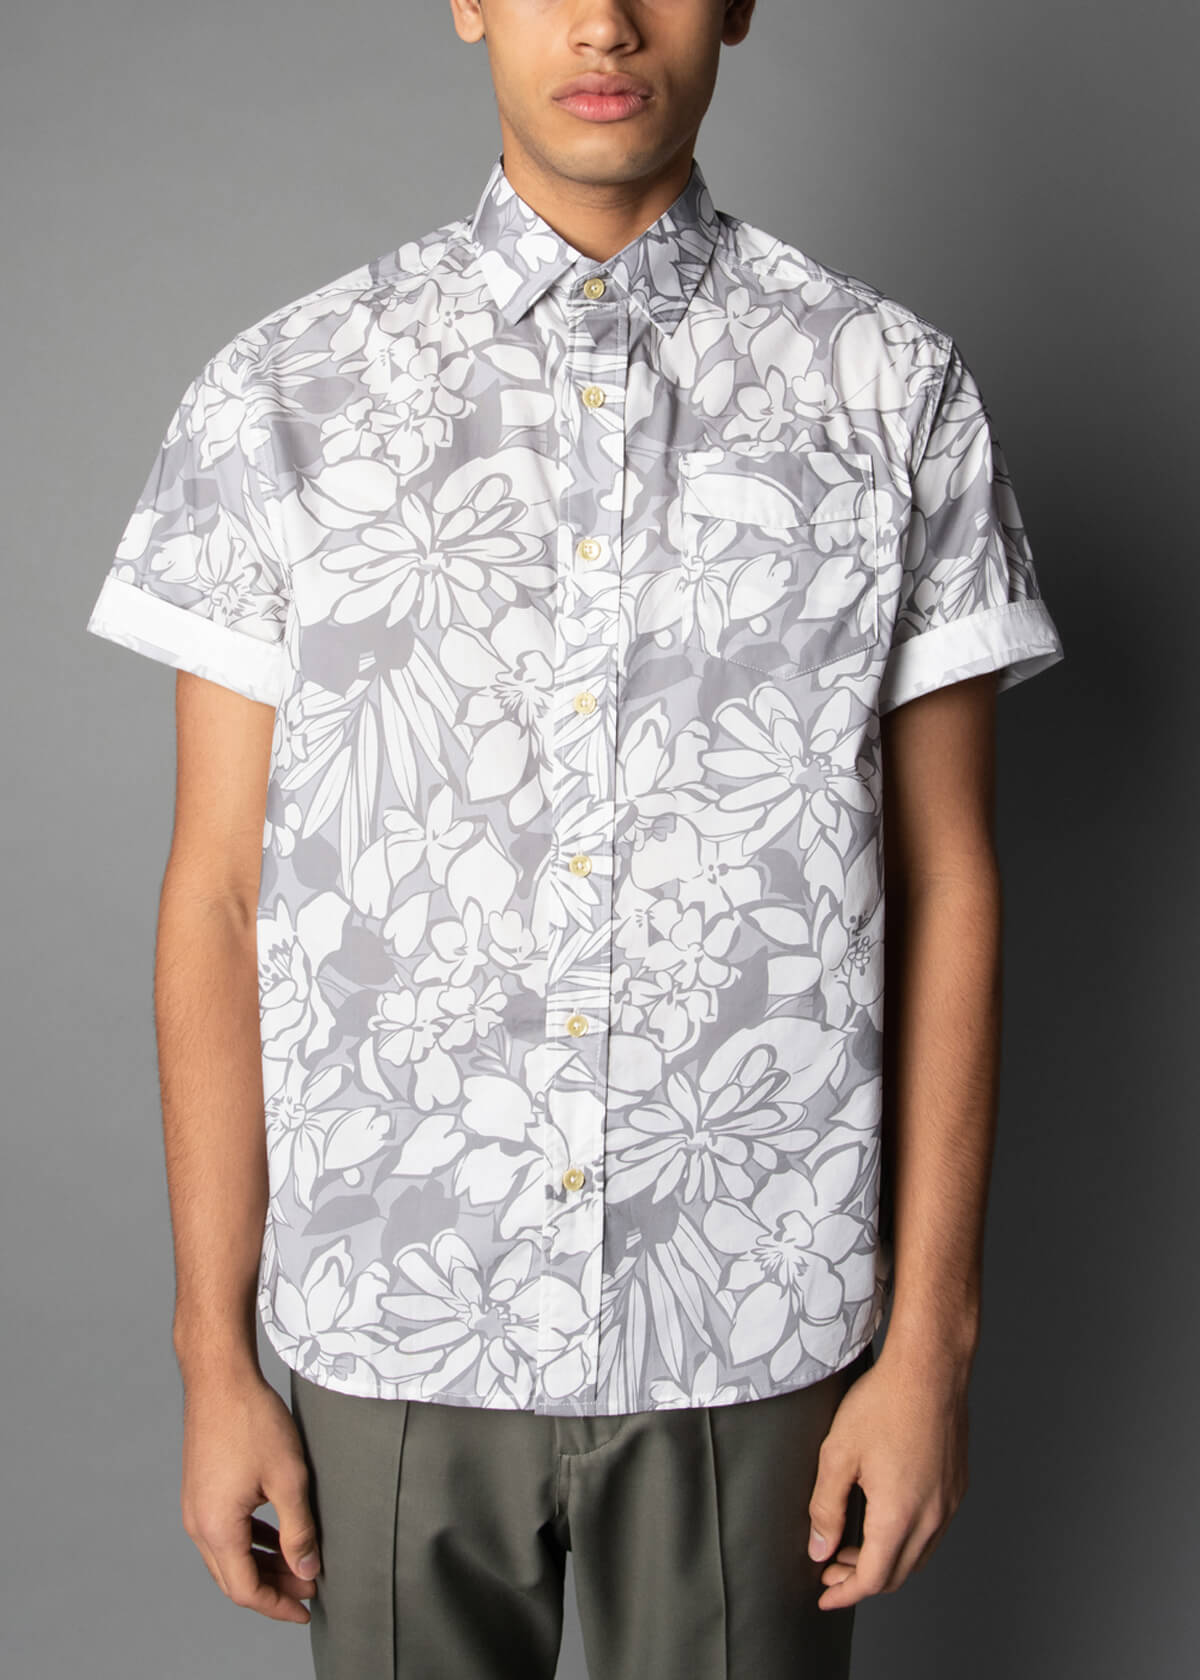 100% cotton white and gray floral print short sleeve shirt for men